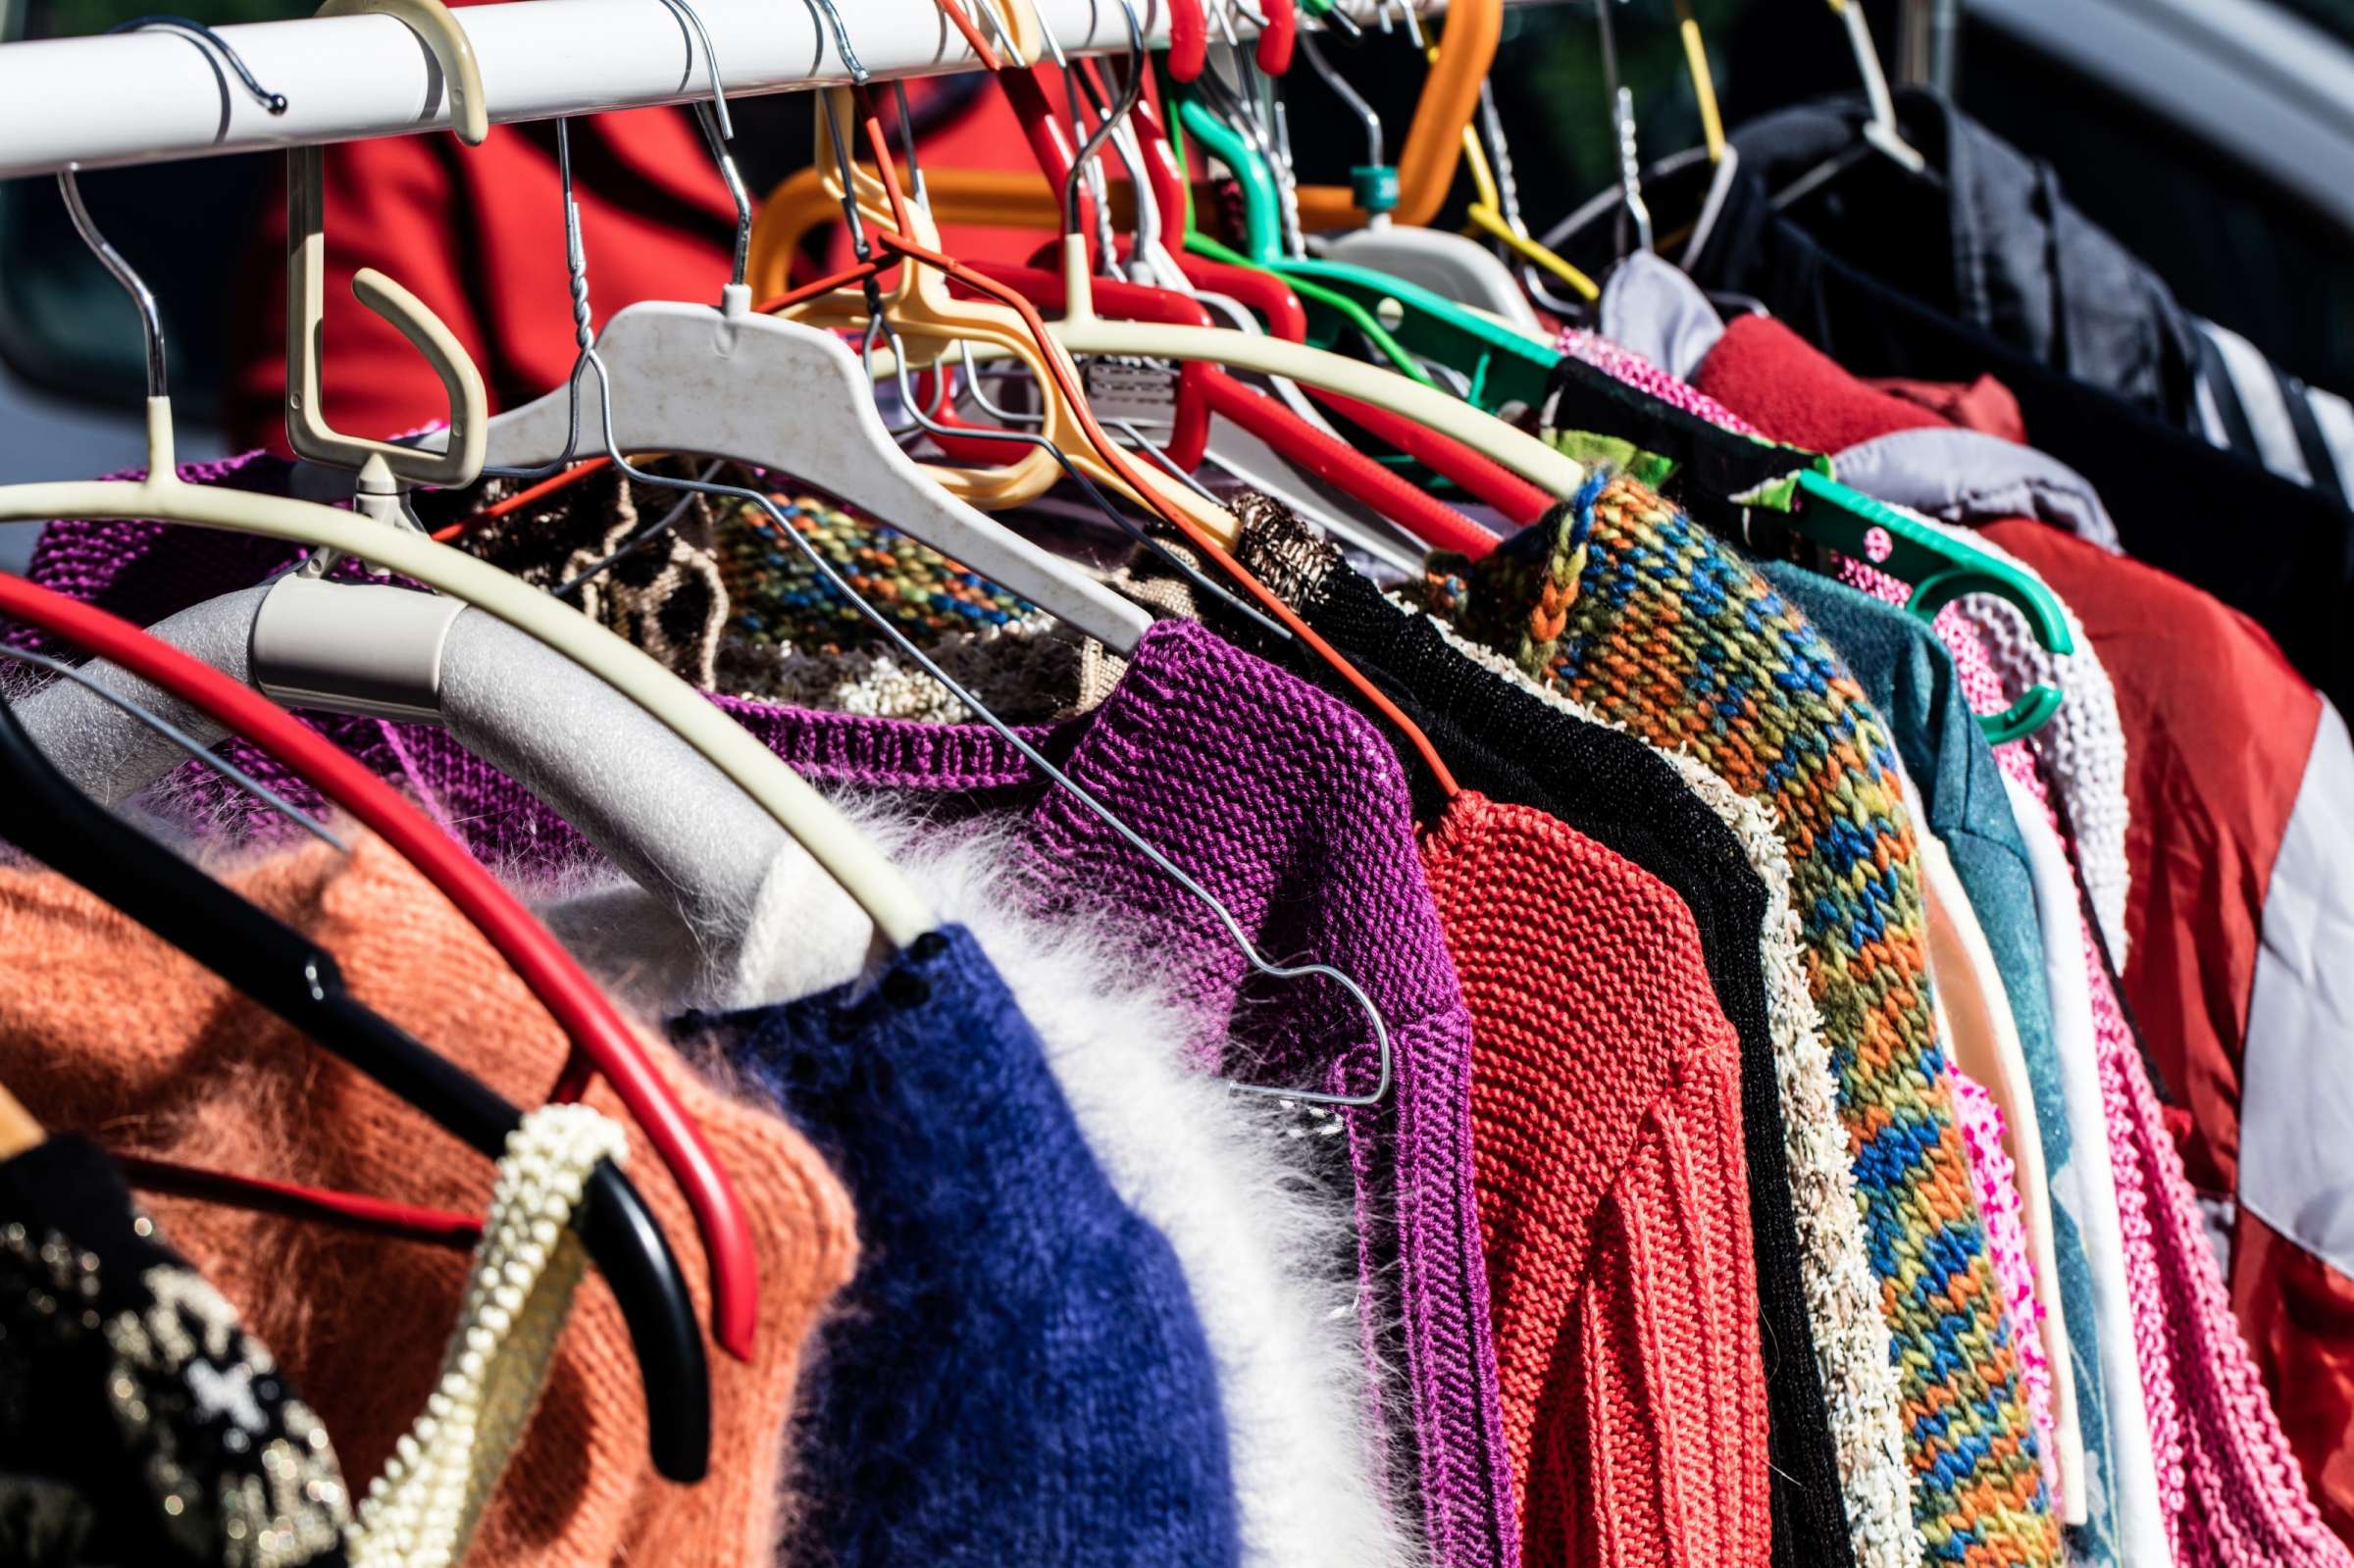 Background image: Rack of Clothes